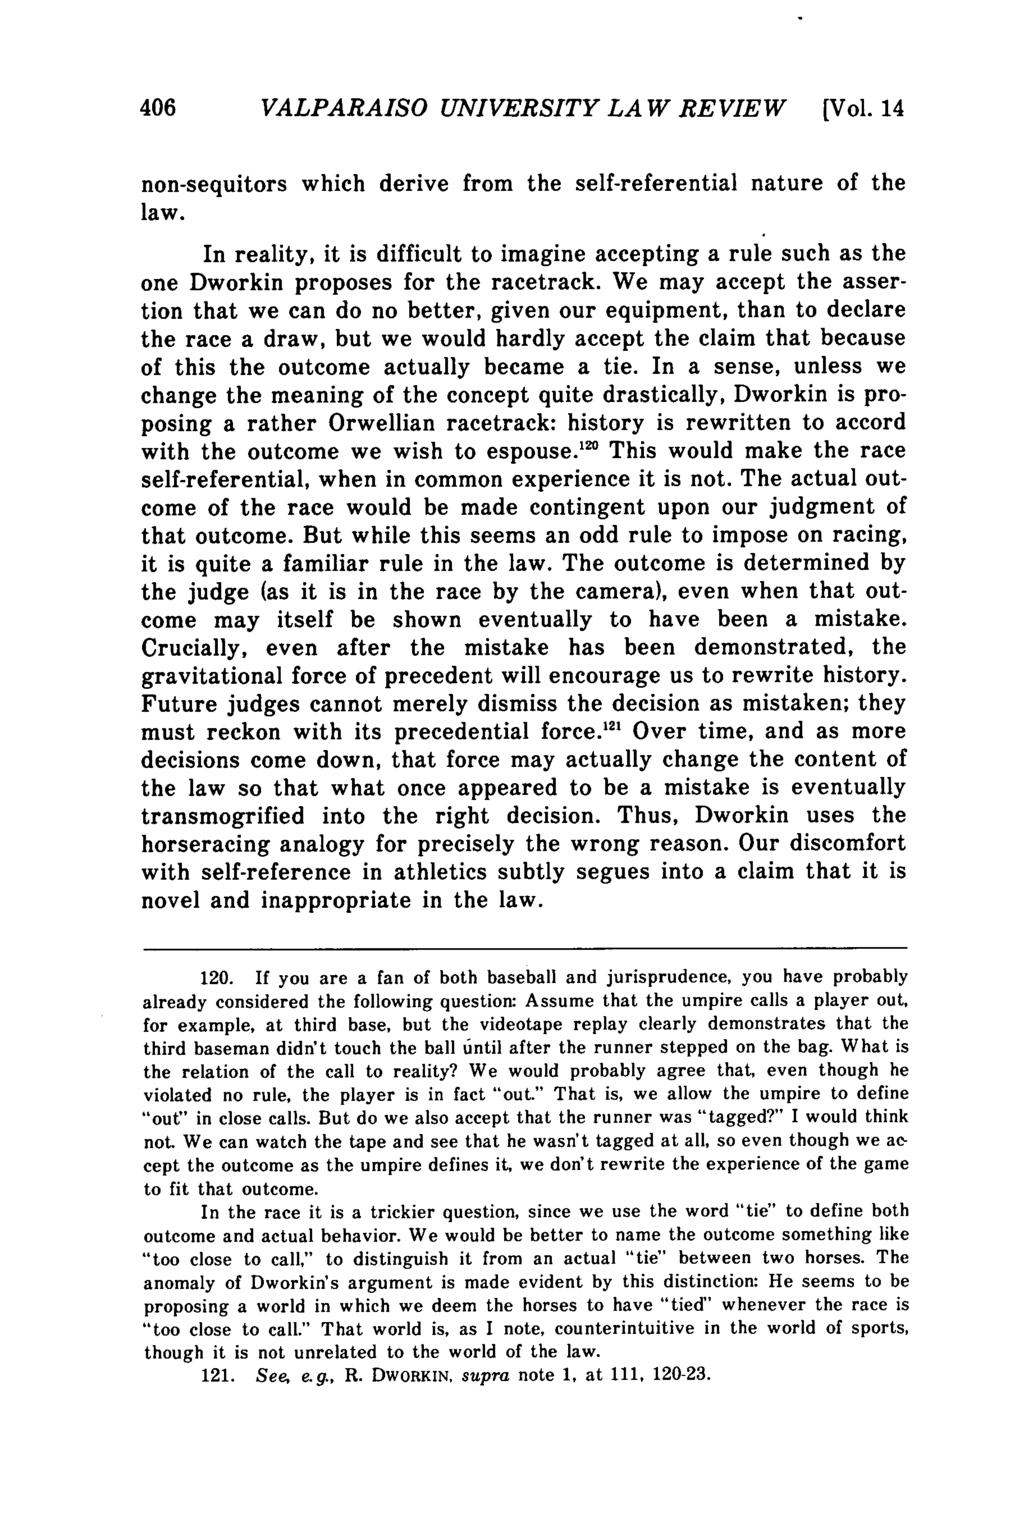 Valparaiso University Law Review, Vol. 14, No. 3 [1980], Art. 1 406 VALPARAISO UNIVERSITY LAW REVIEW [Vol. 14 non-sequitors which derive from the self-referential nature of the law.